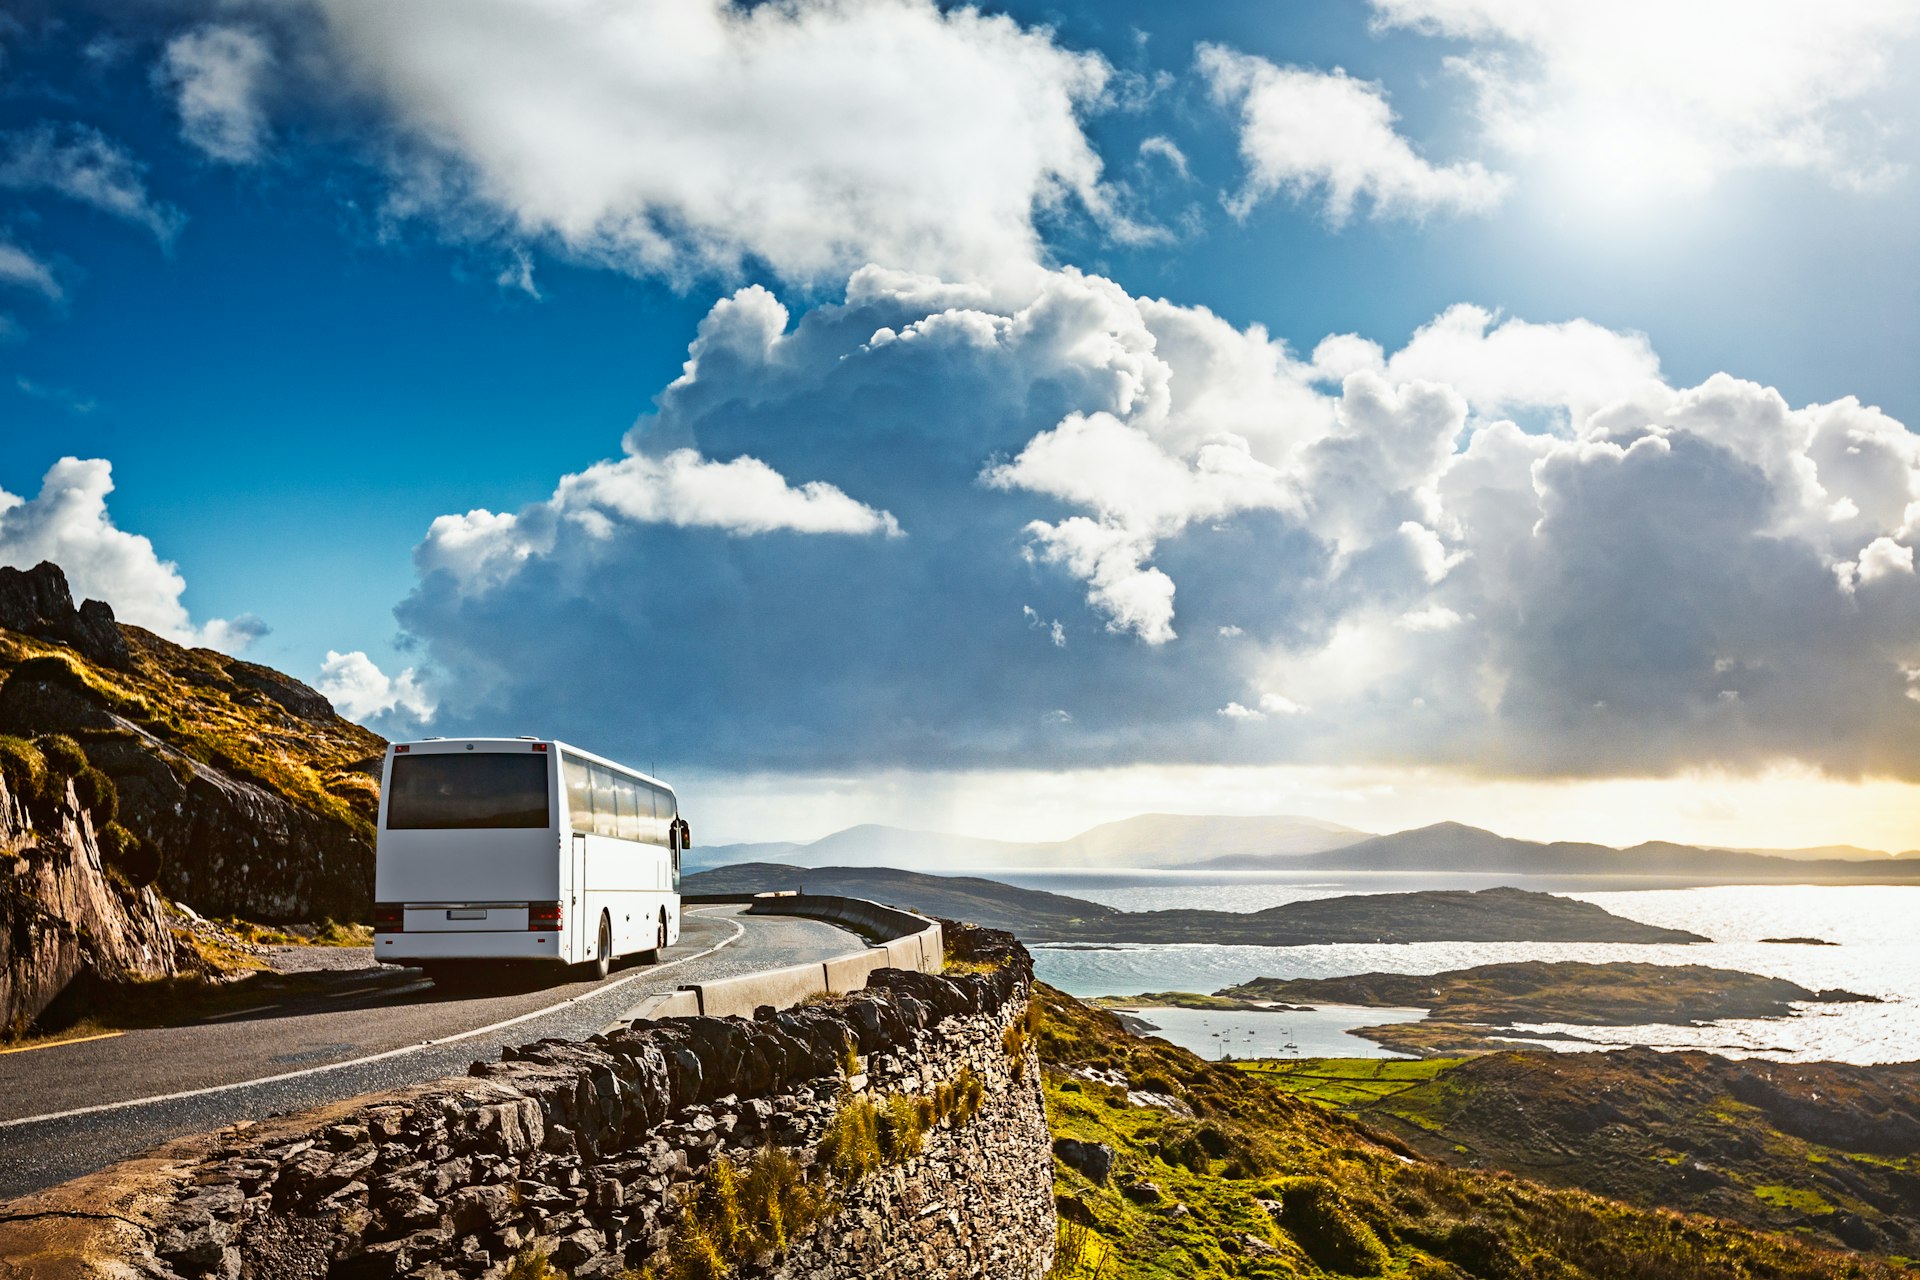 Tourist bus traveling on mountain road. Ring of Kerry, Ireland.